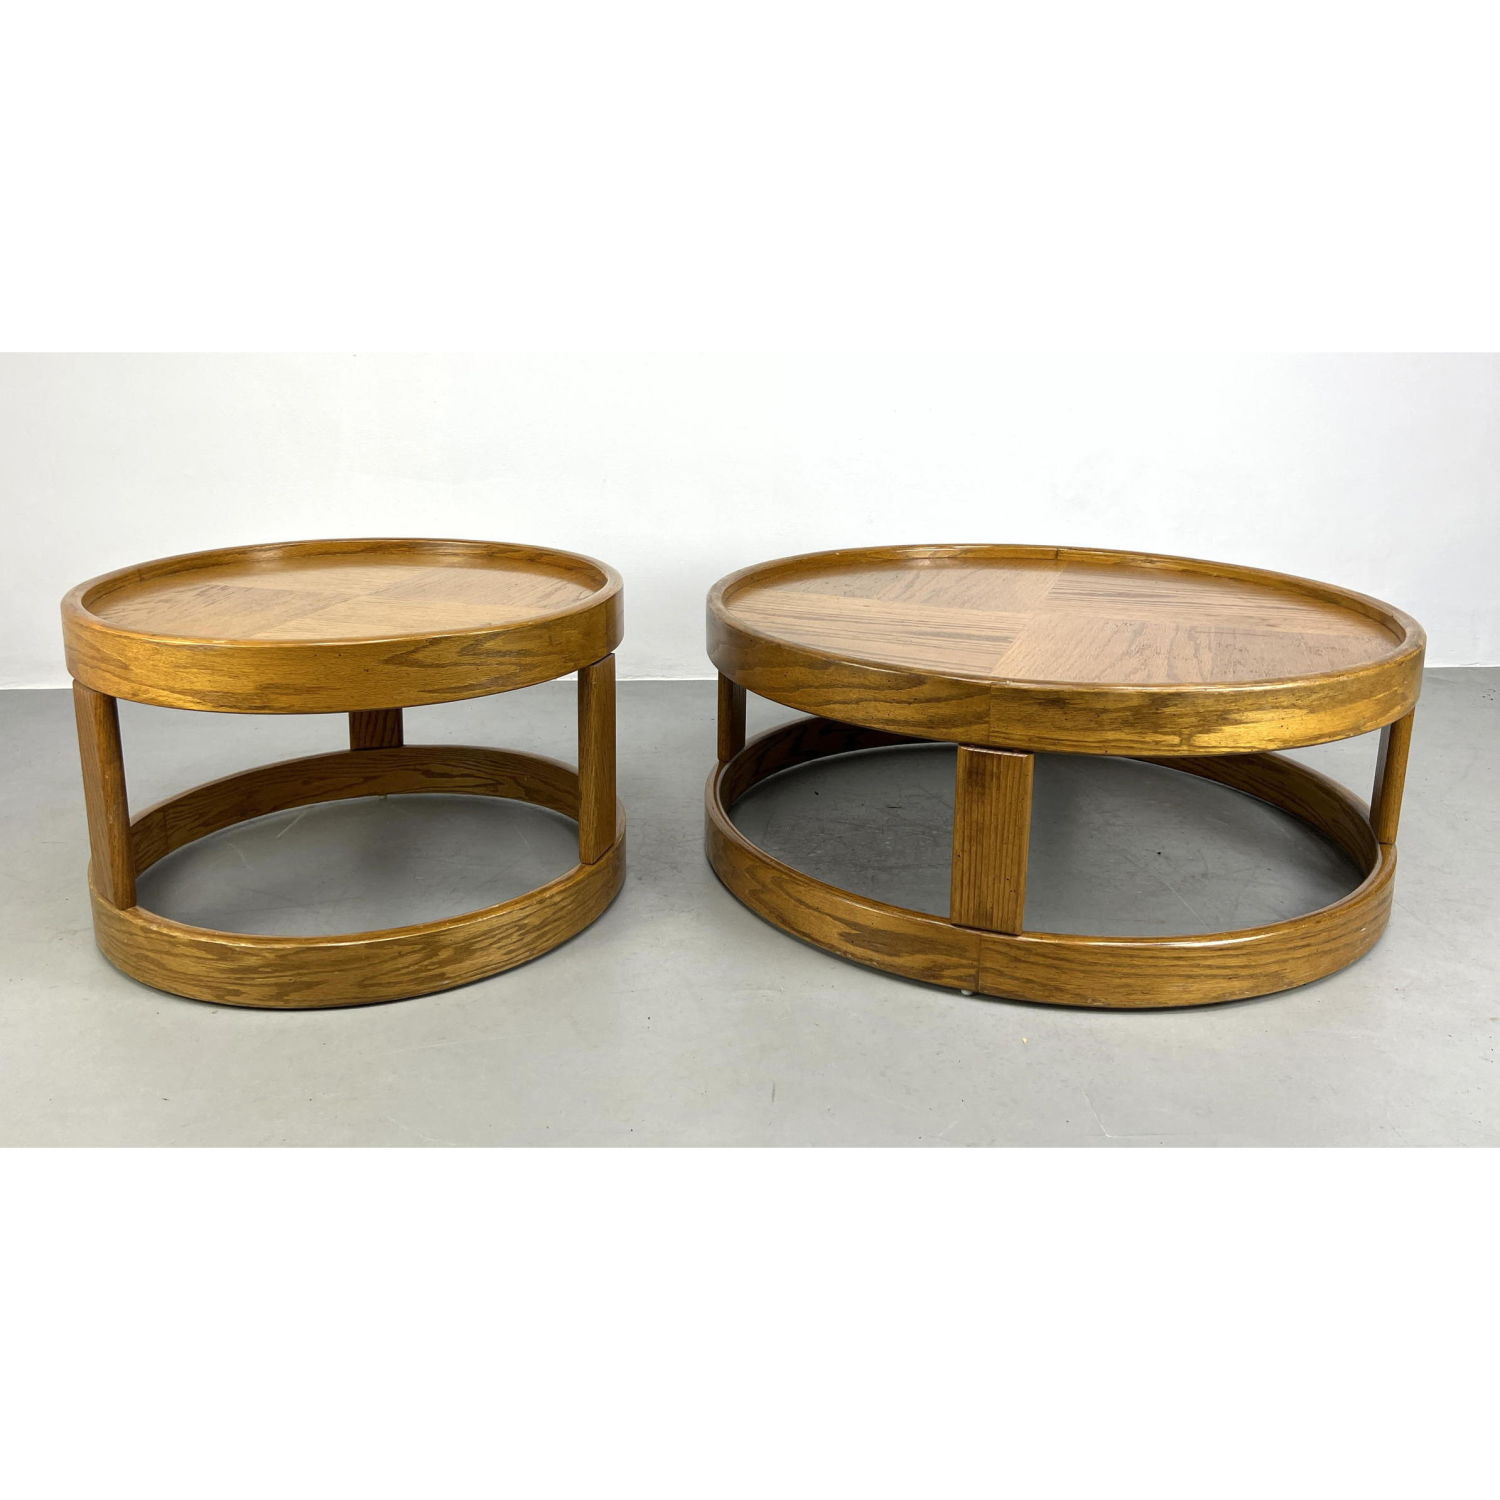 2pc HOWARD Modernist Round Tables  2b9e9a